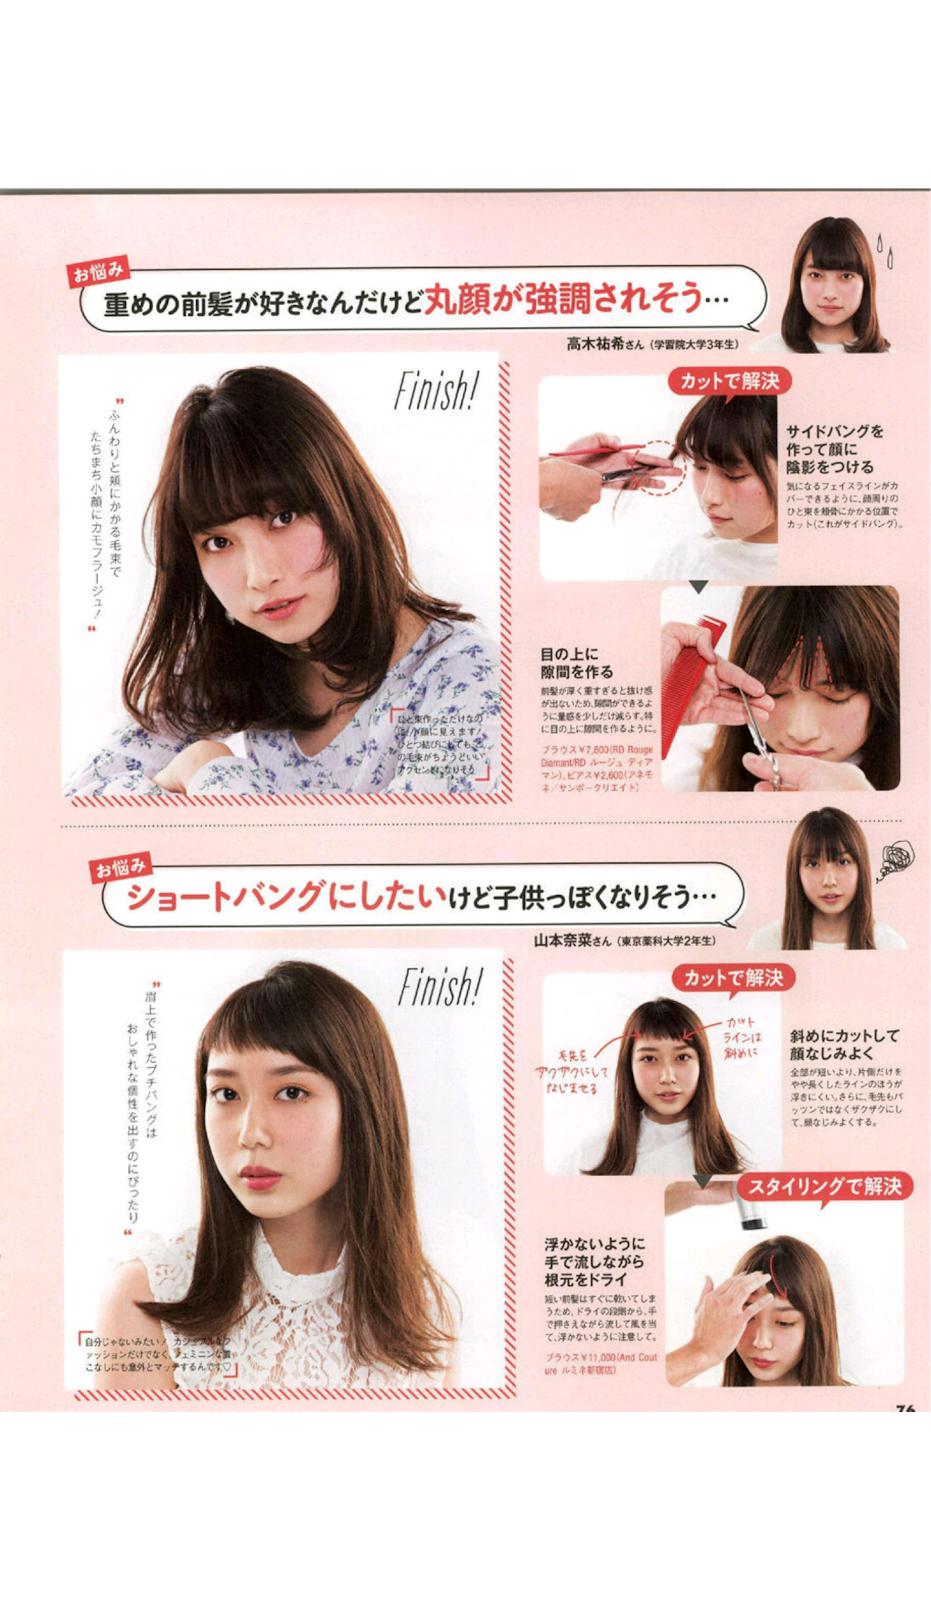 Cancam April 2018 Issue [Japanese Magazine Scans] - Beauty ...